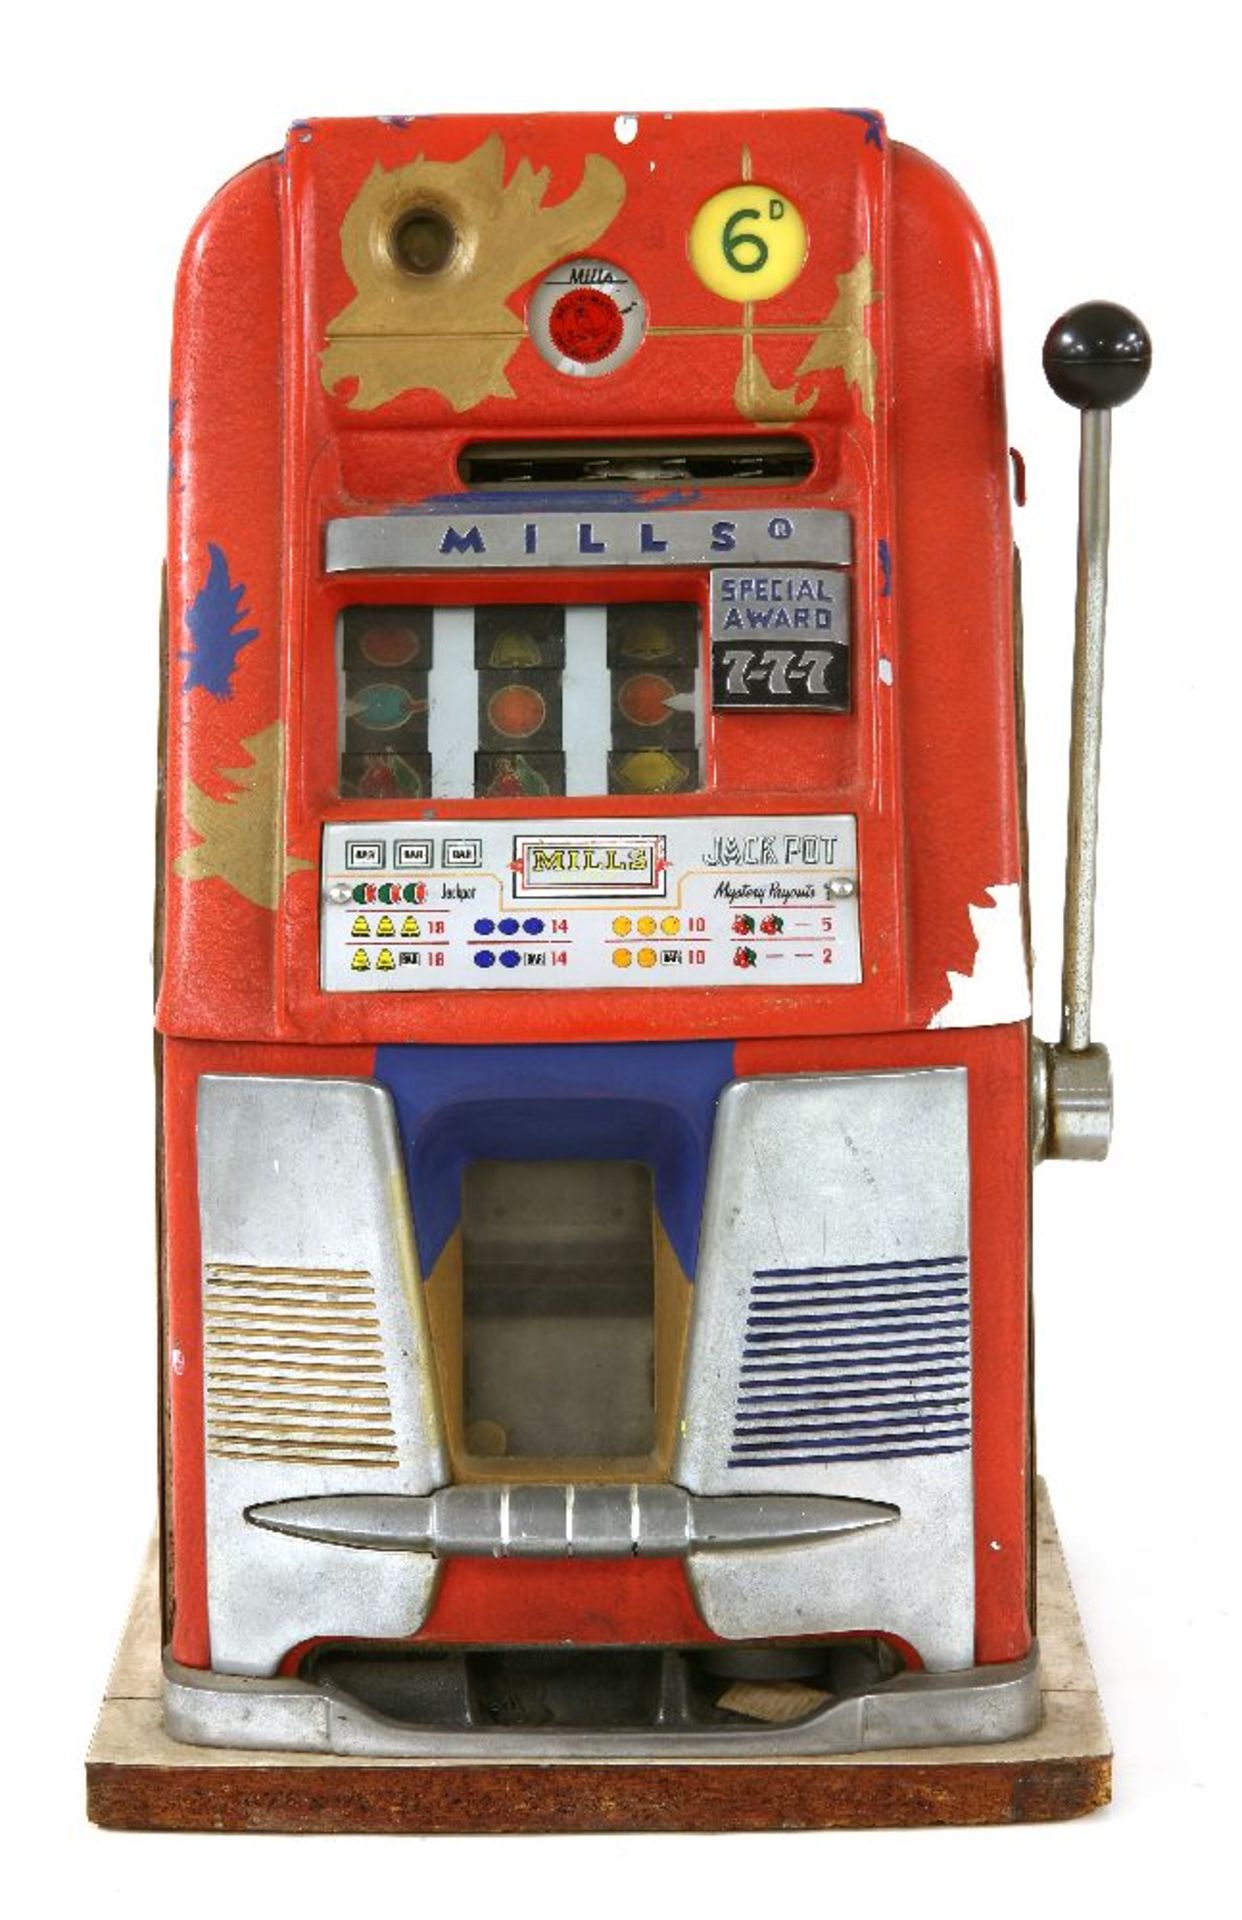 A MILLS' ONE-ARMED BANDIT, an American Mills' 'Special Award 777' one-armed bandit fruit machine